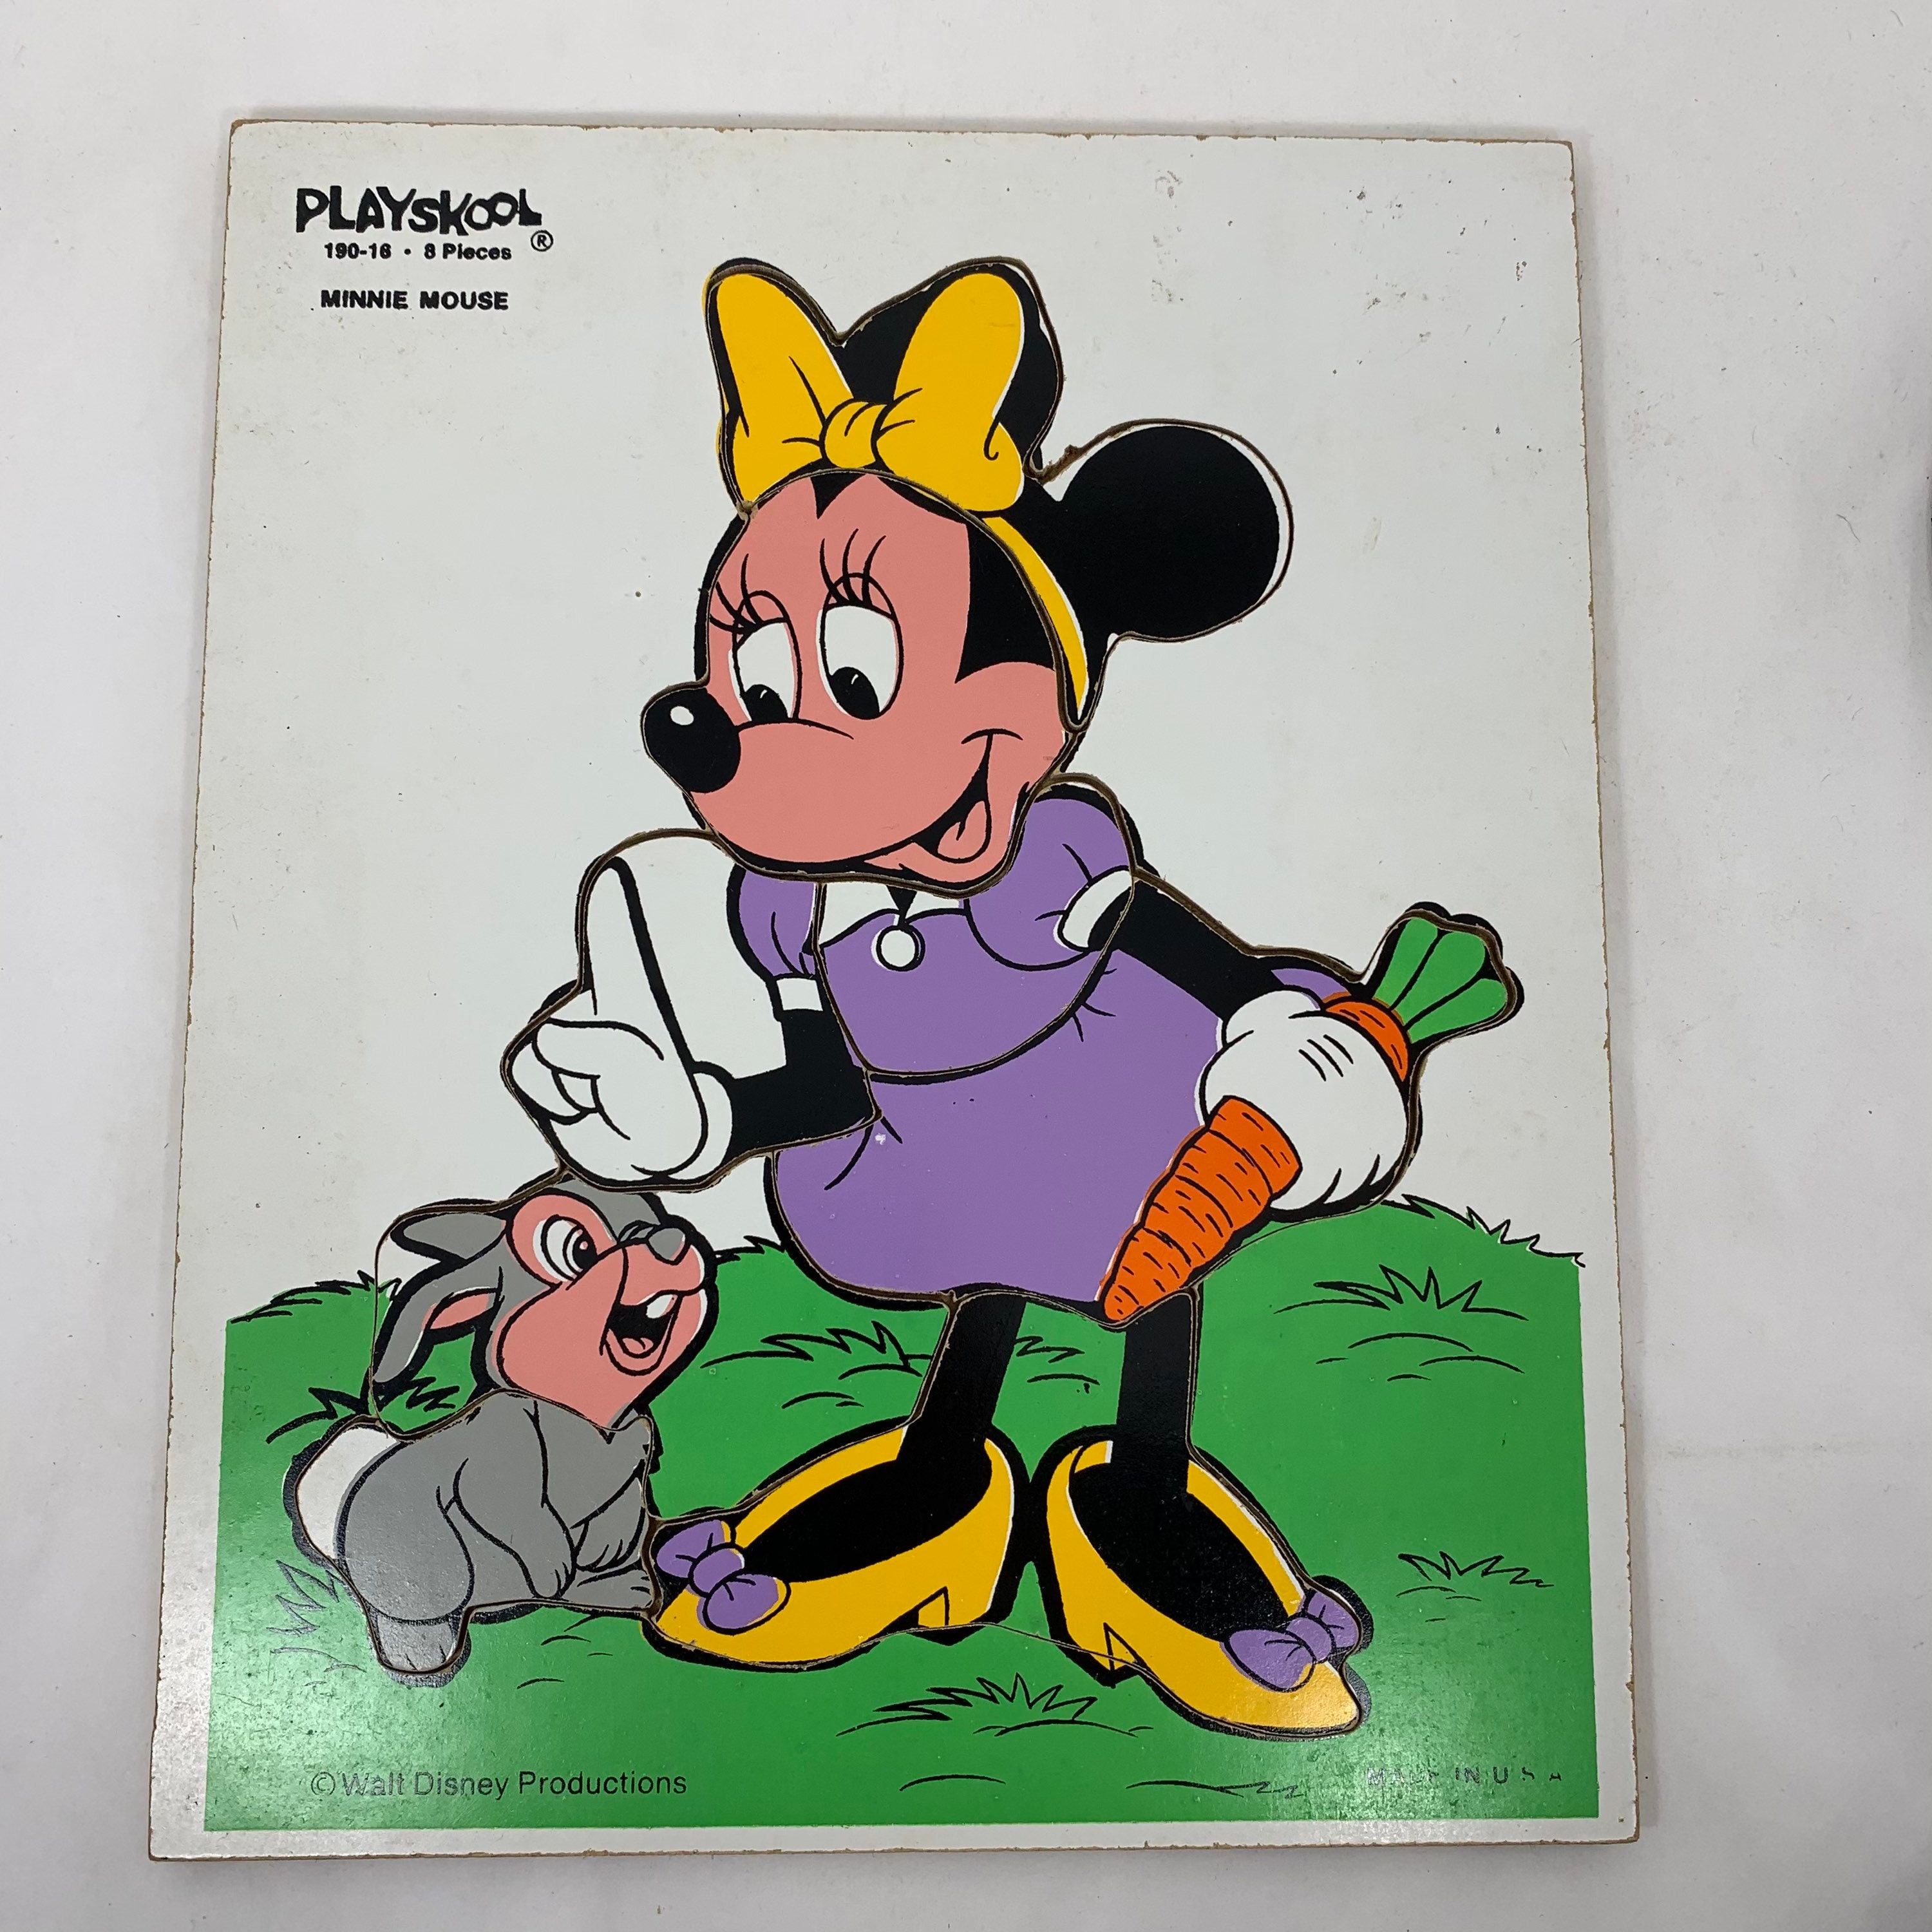 Frank Minnie Mouse Puzzle 26*3 13903 at Rs 475.00, Kavi Nagar, Ghaziabad